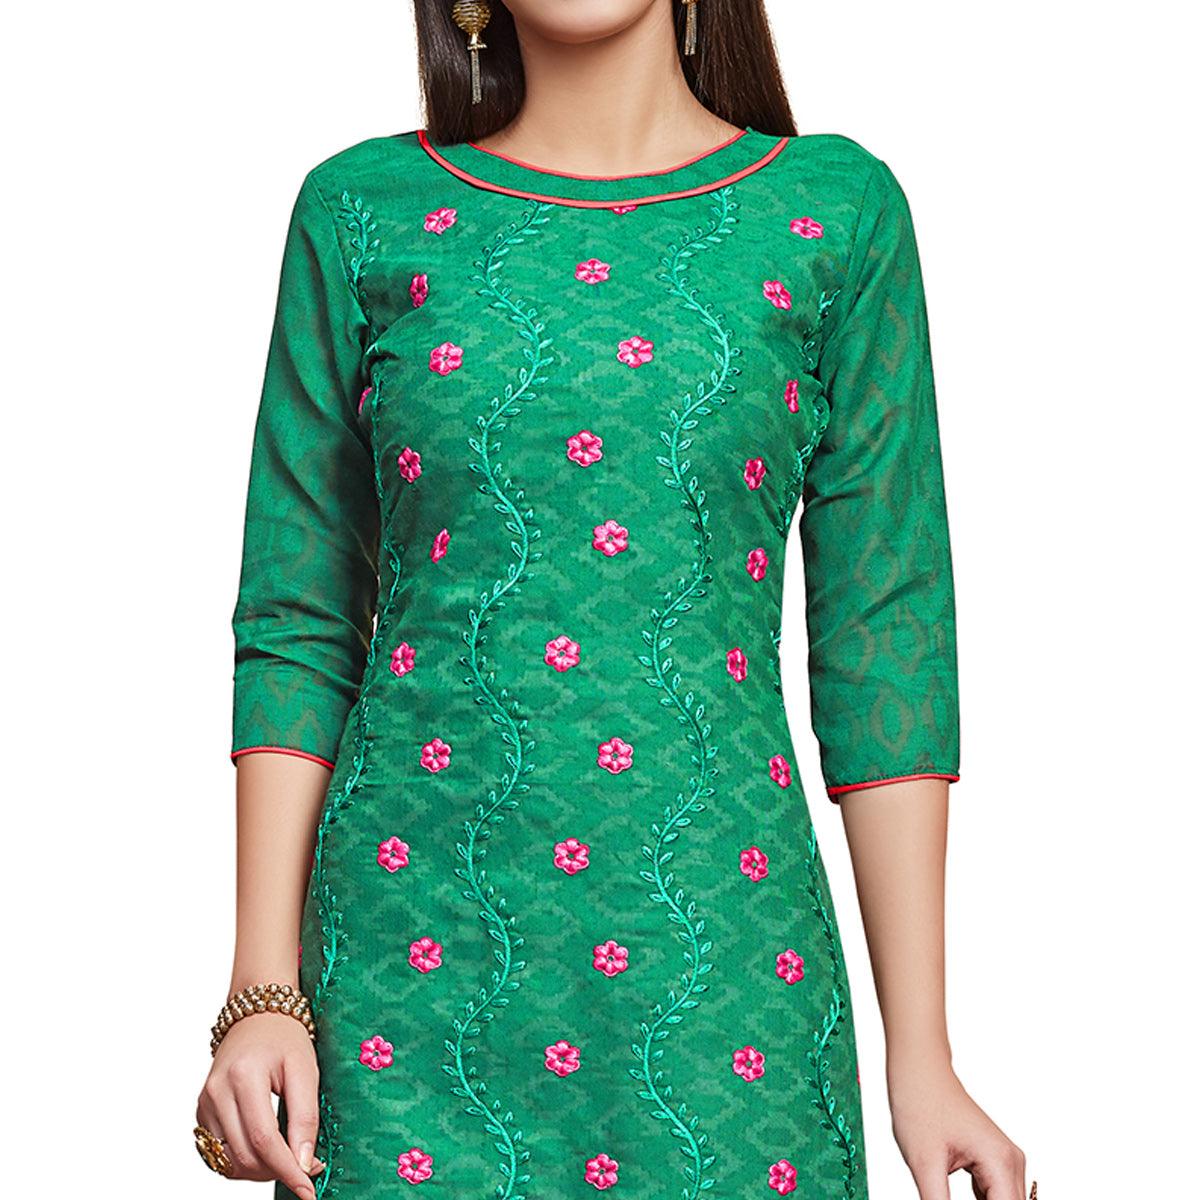 Pleasant Green Colored Casual Wear Embroidered Jacquard Dress Material - Peachmode